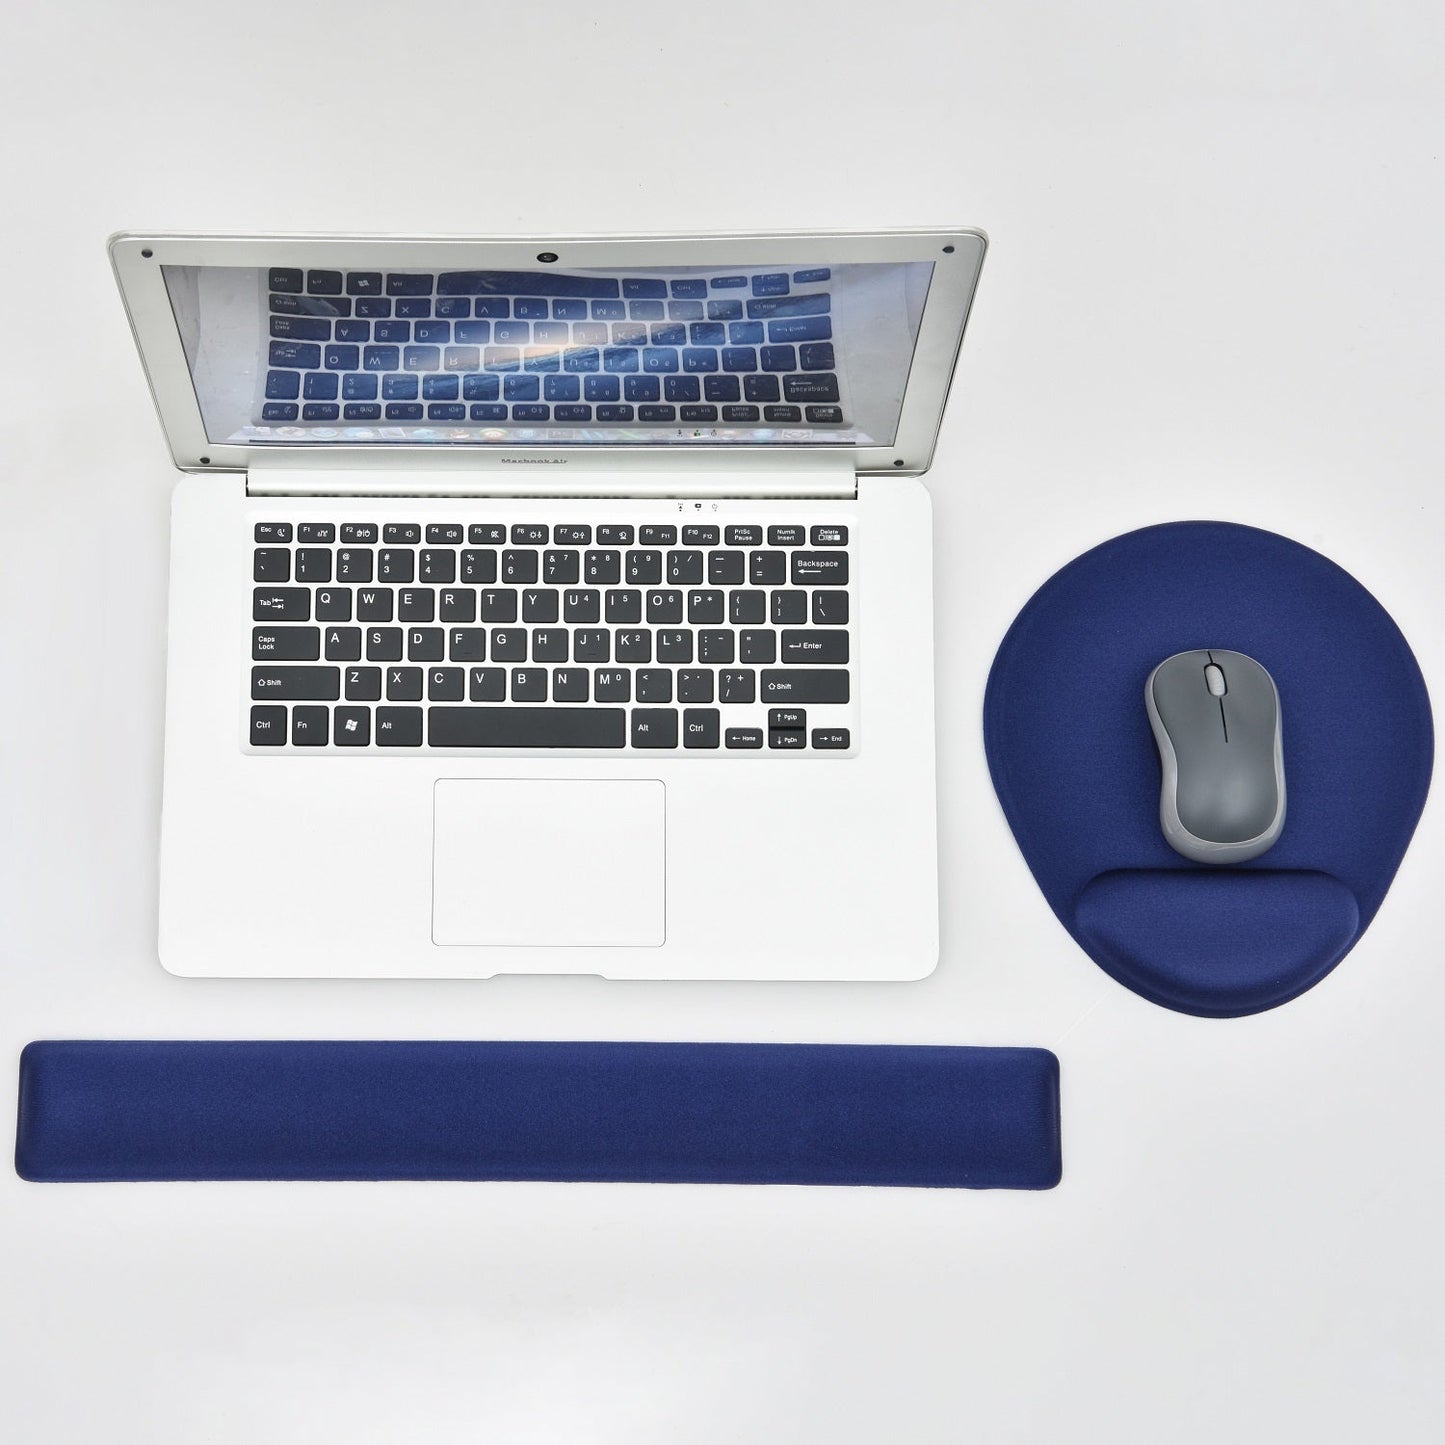 DAC® MP-127 Super-Gel™ "Mini Round" Mouse Pad with Palm Support, Blue